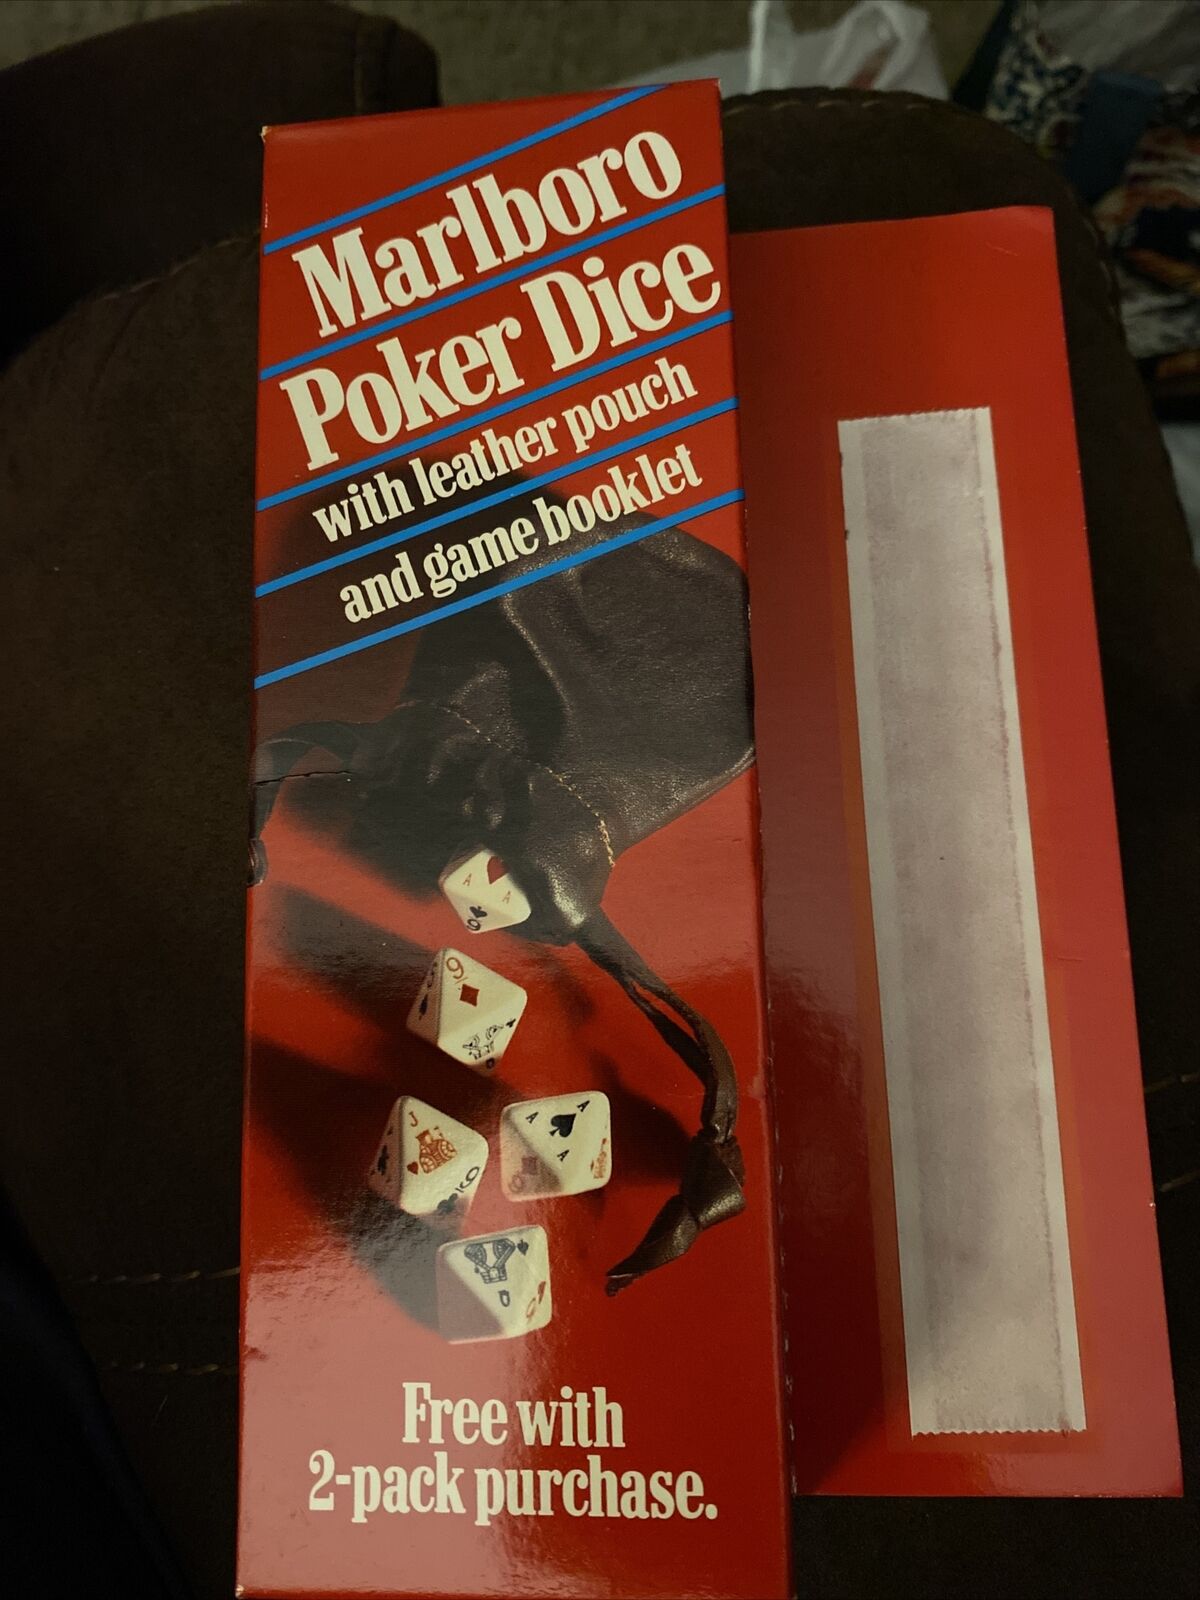 Marlboro Poker Dice with Leather Pouch and Game Booklet New